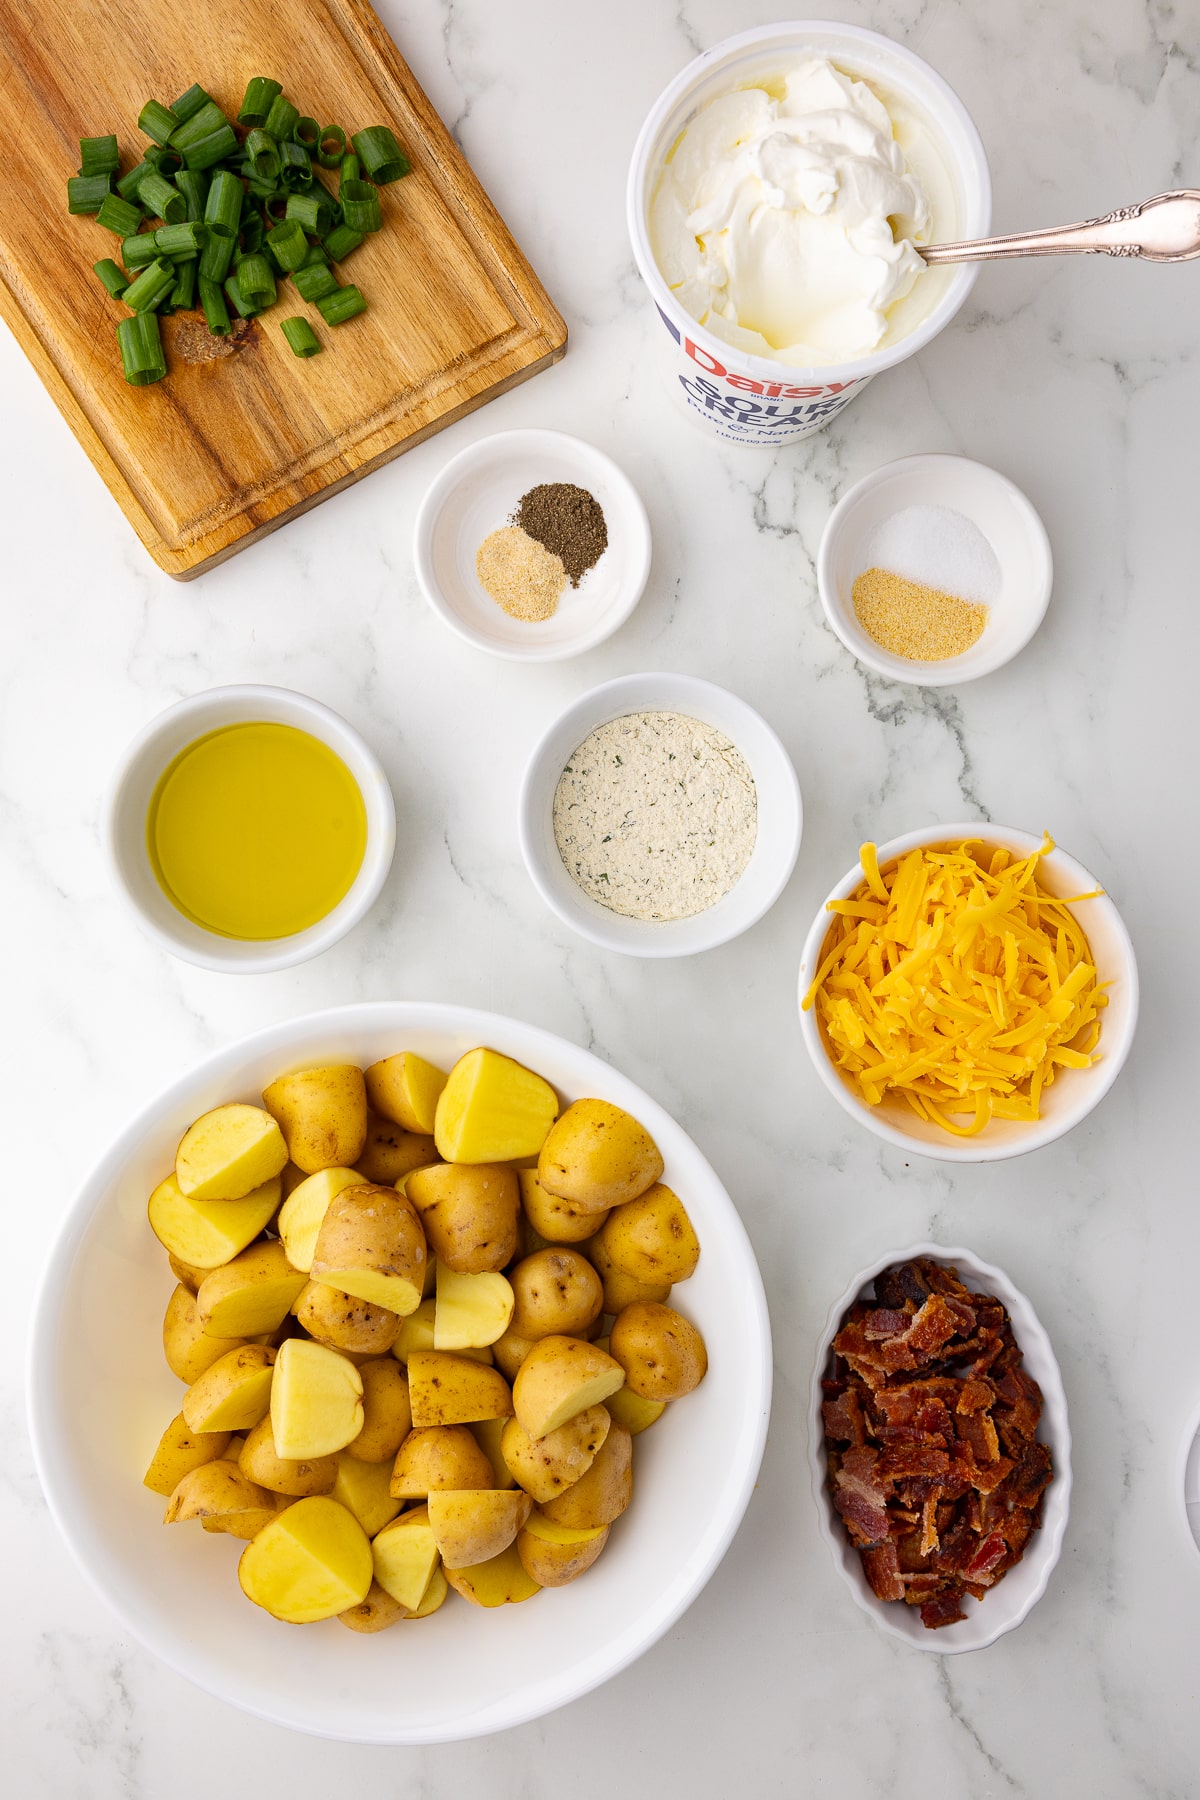 Ingredients for homemade ranch potatoes including toppings like cheese, sour cream and spices